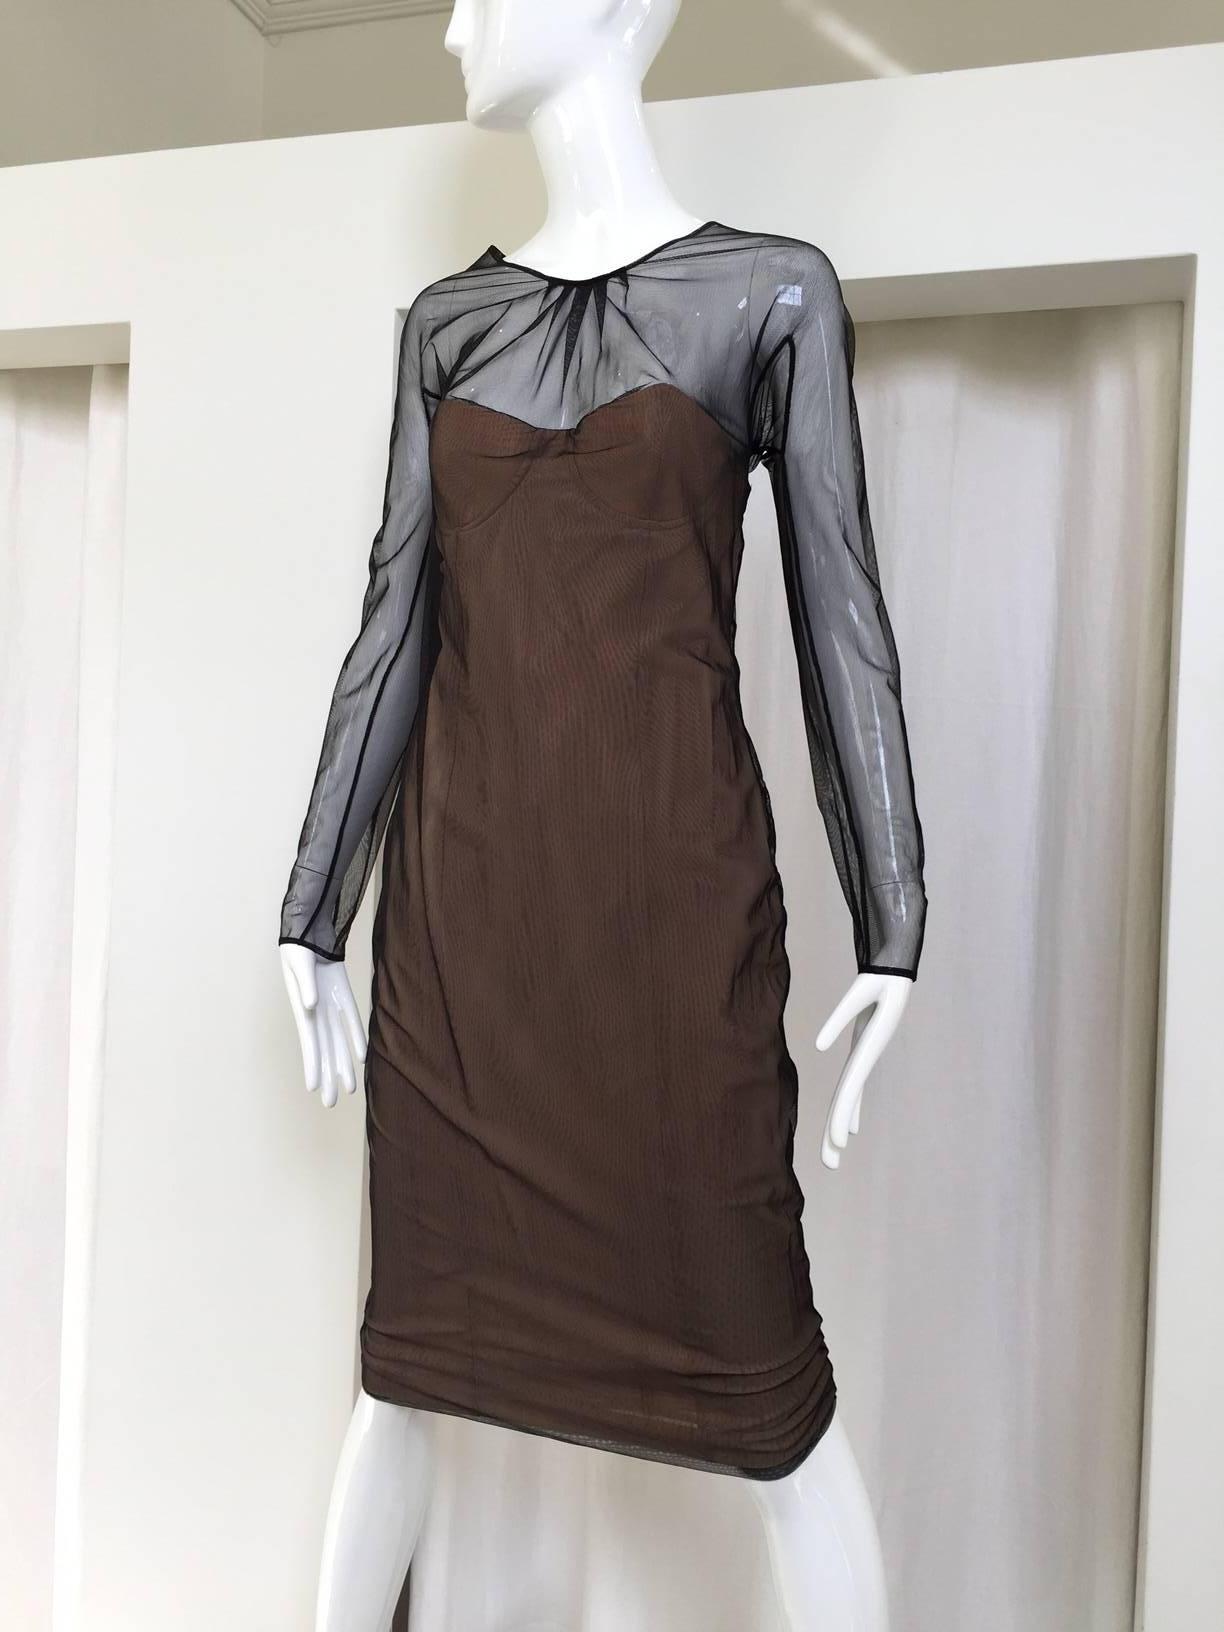  sexy vintage dress designed  by  Tom Ford for GUCCI in 2001. ( see runway picture)
sheer black mesh overlay with corset strapless nude fabric inside. V back. ask for more picture. Marked size: 46IT
fit more size 6 or 8 ( fabric stretch) 
Bust: 36